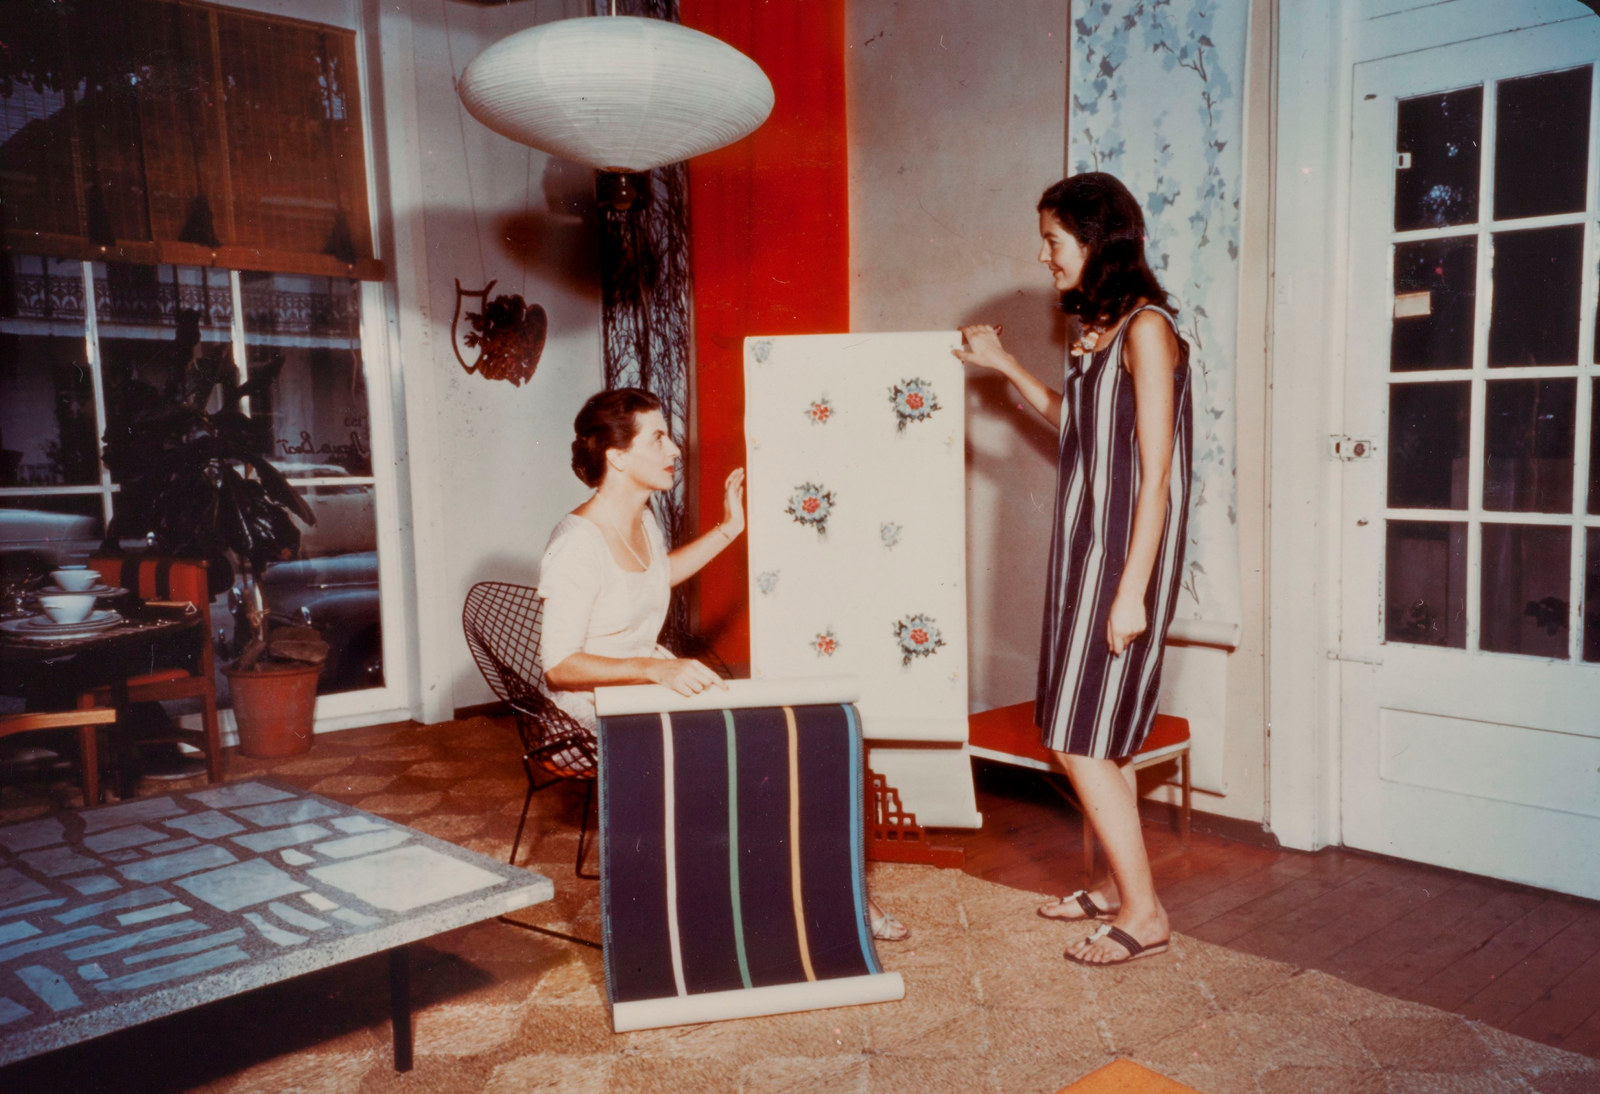 Photograph of two women in a store looking at wallpaper.